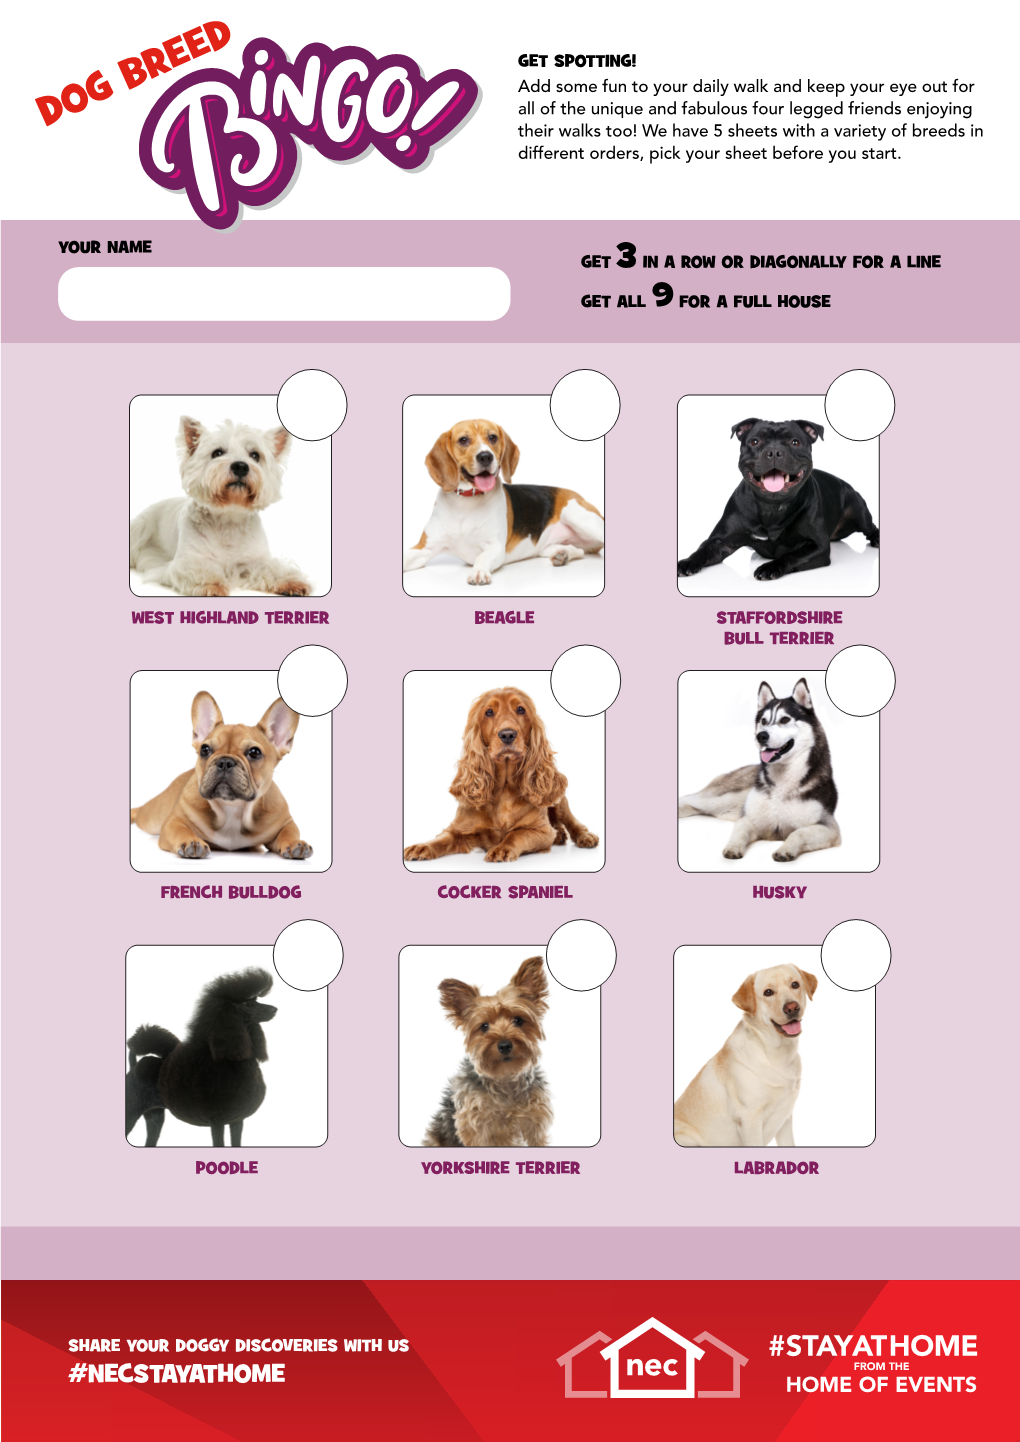 DOG BREED Their Walks Too! We Have 5 Sheets with a Variety of Breeds in Different Orders, Pick Your Sheet Before You Start